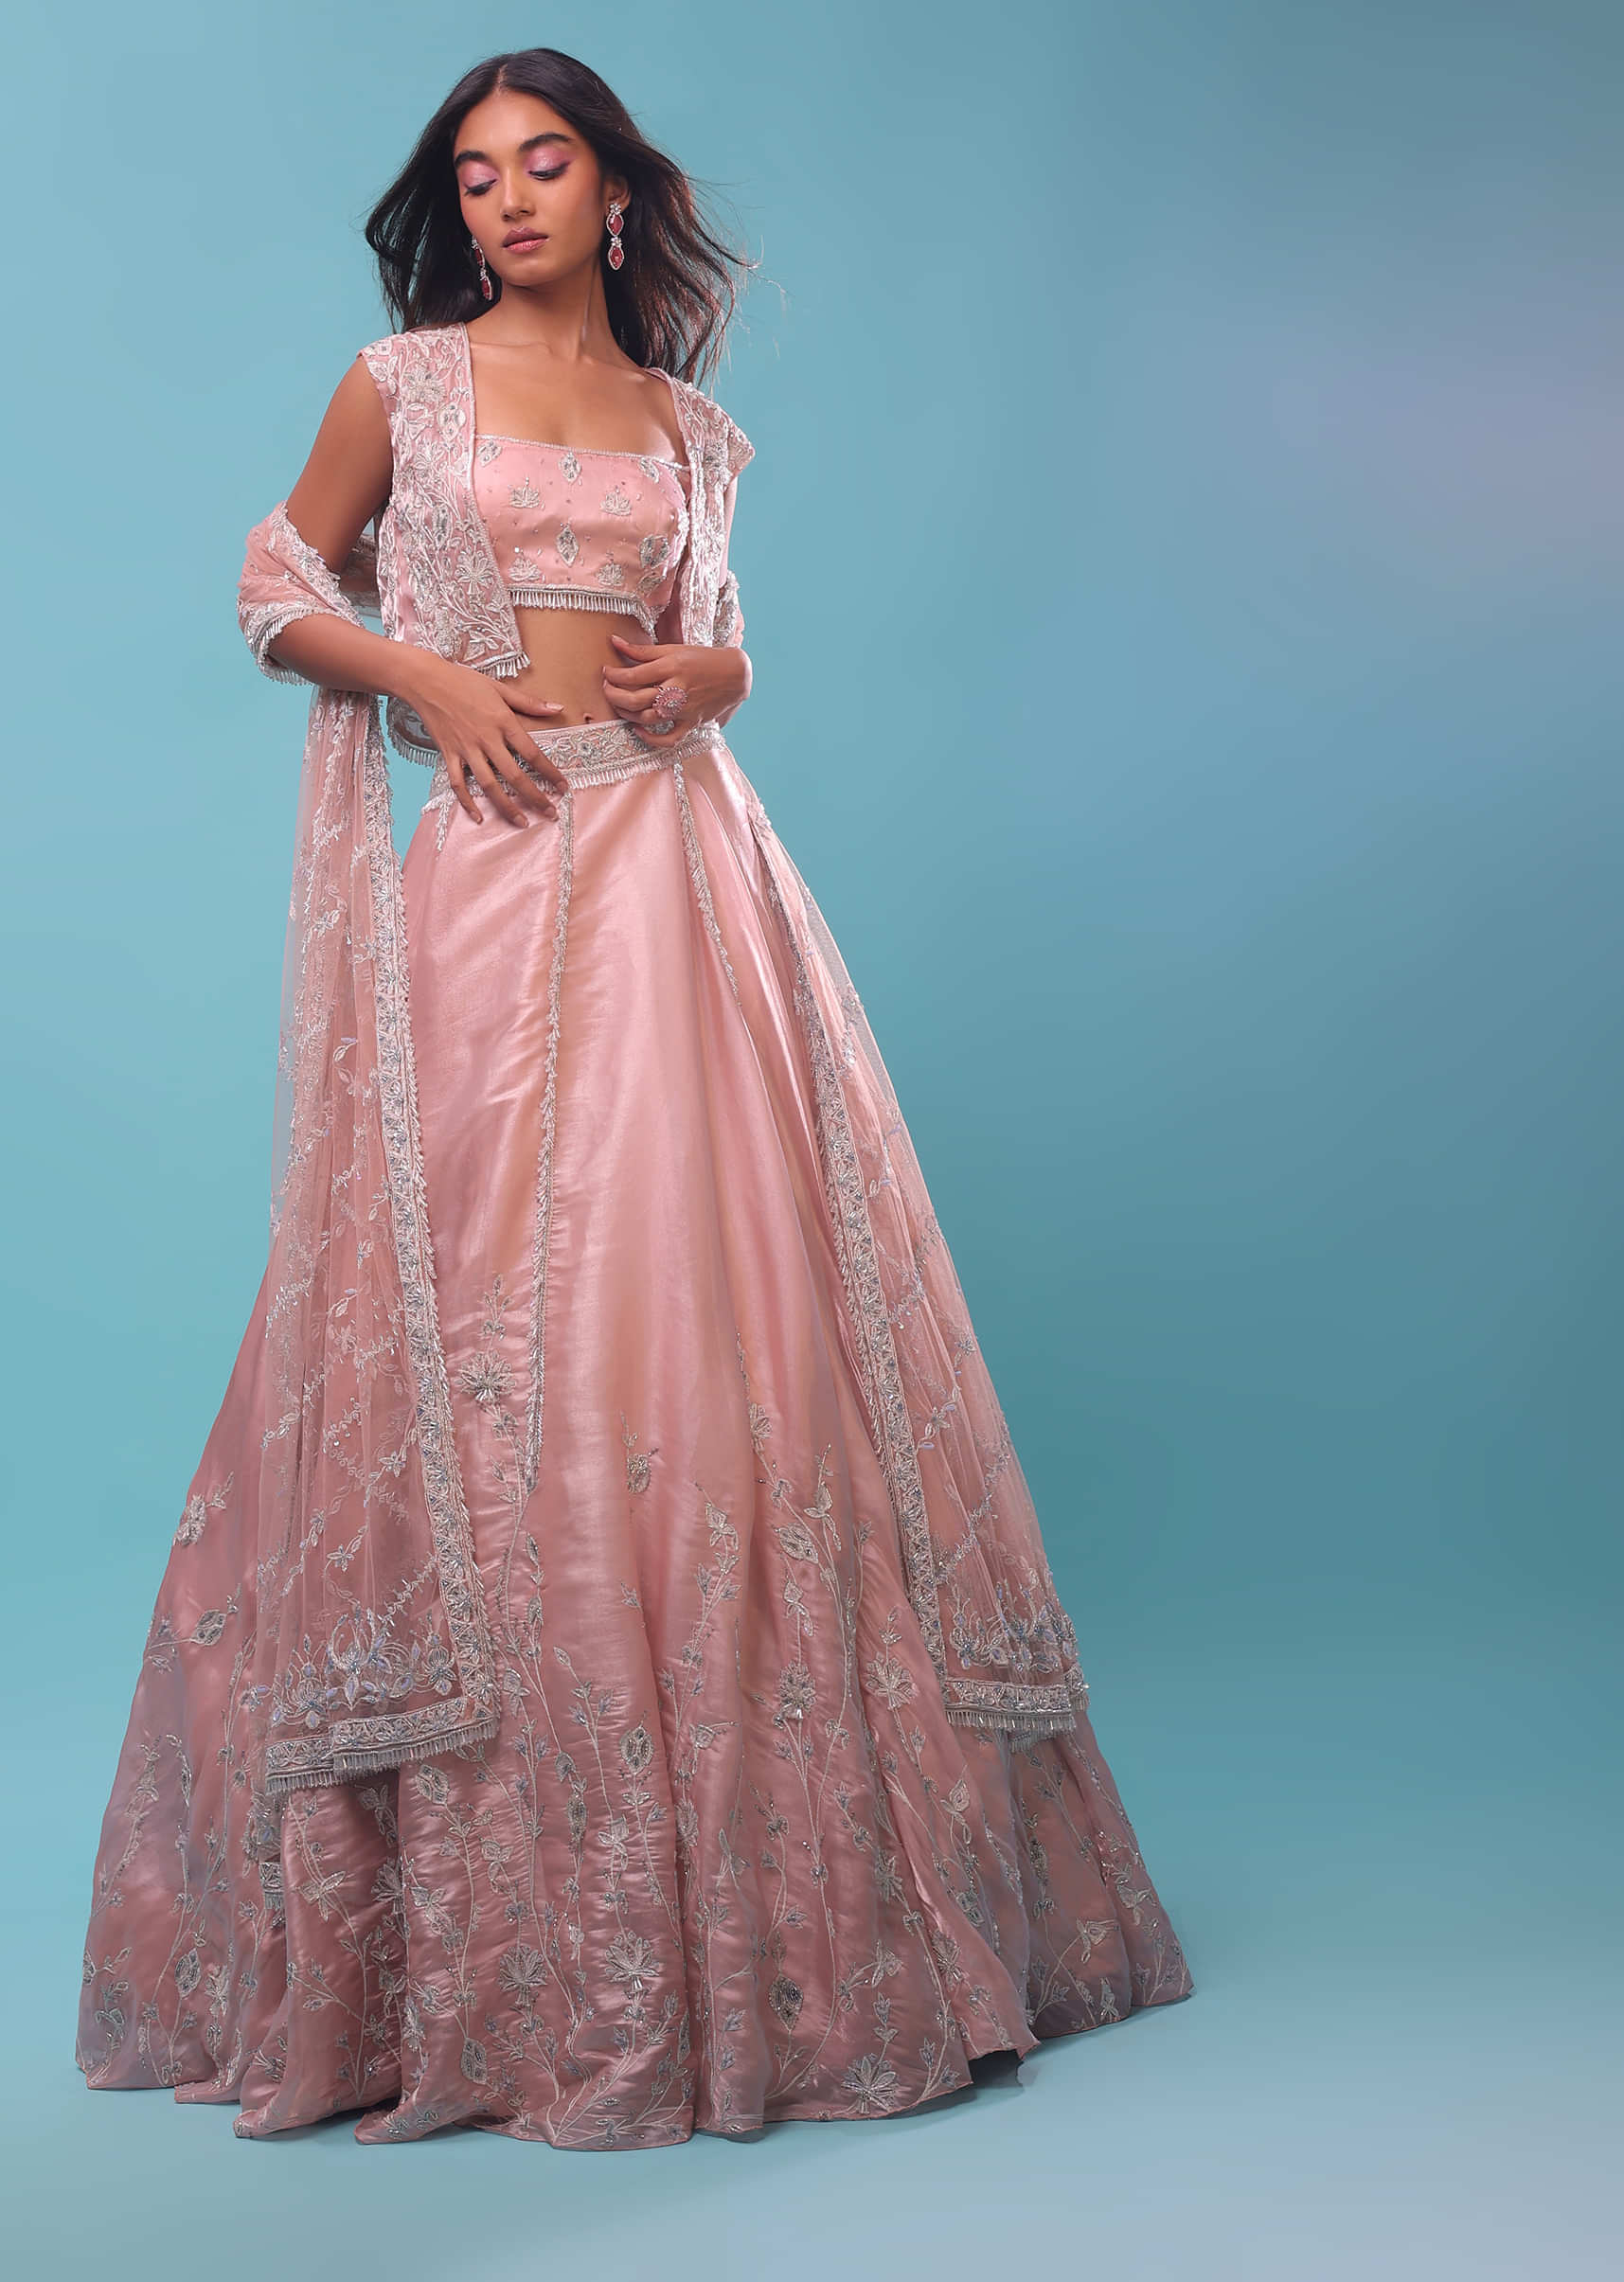 Powder Pink Lehenga And Crop Top In 3D Sequins Floral Motifs Embroidery, The Crop Comes In A Spaghetti Strap, Jacket In Sleeveless In Stones Emroidery